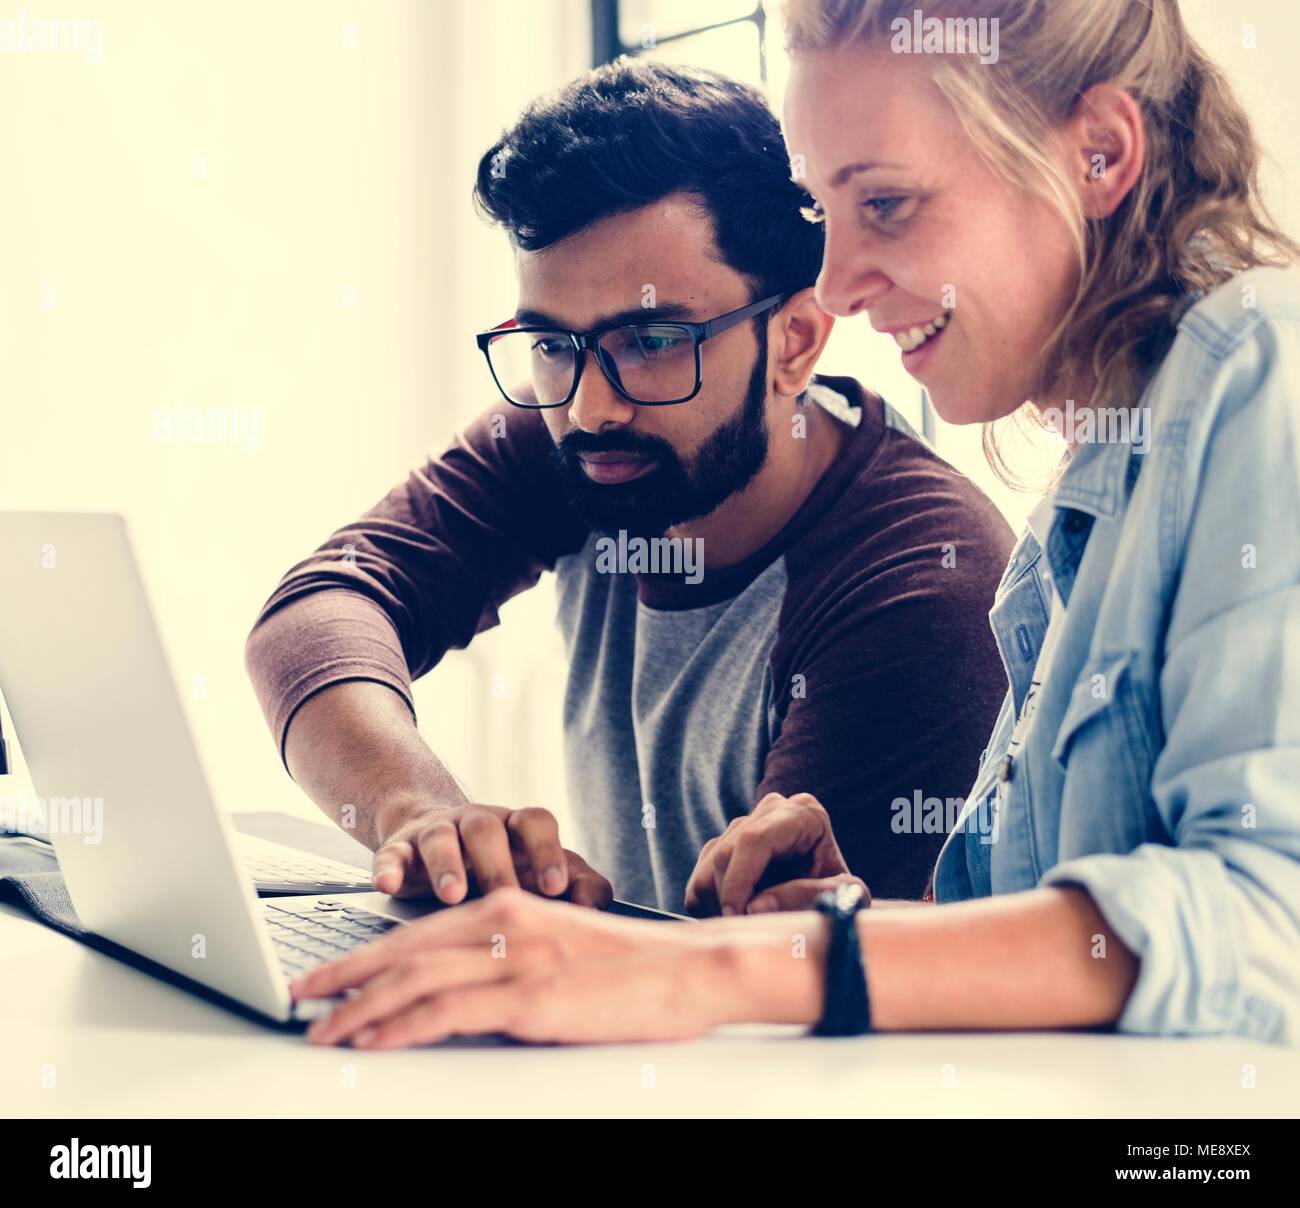 People working together about internet technology Stock Photo